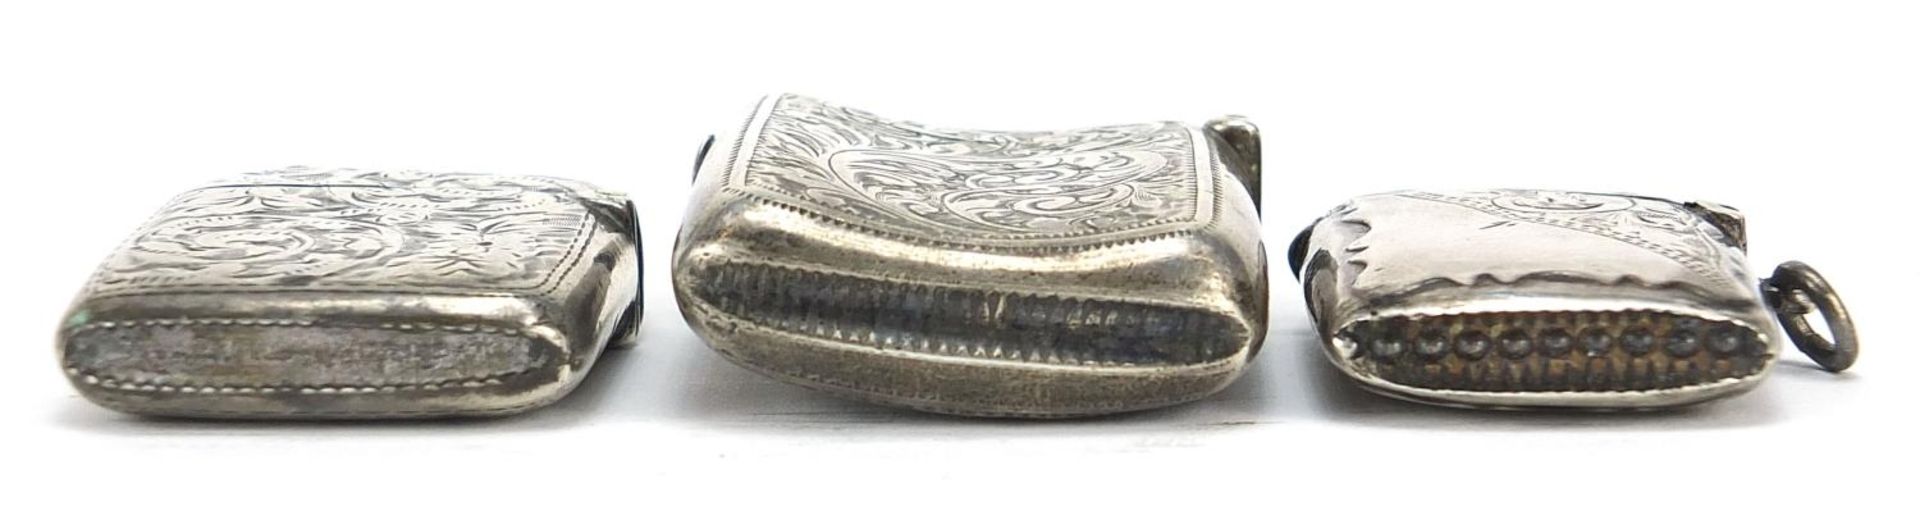 Three Victorian and later silver vestas with engraved decoration, Chester 1899, Birmingham 1898 - Image 10 of 14